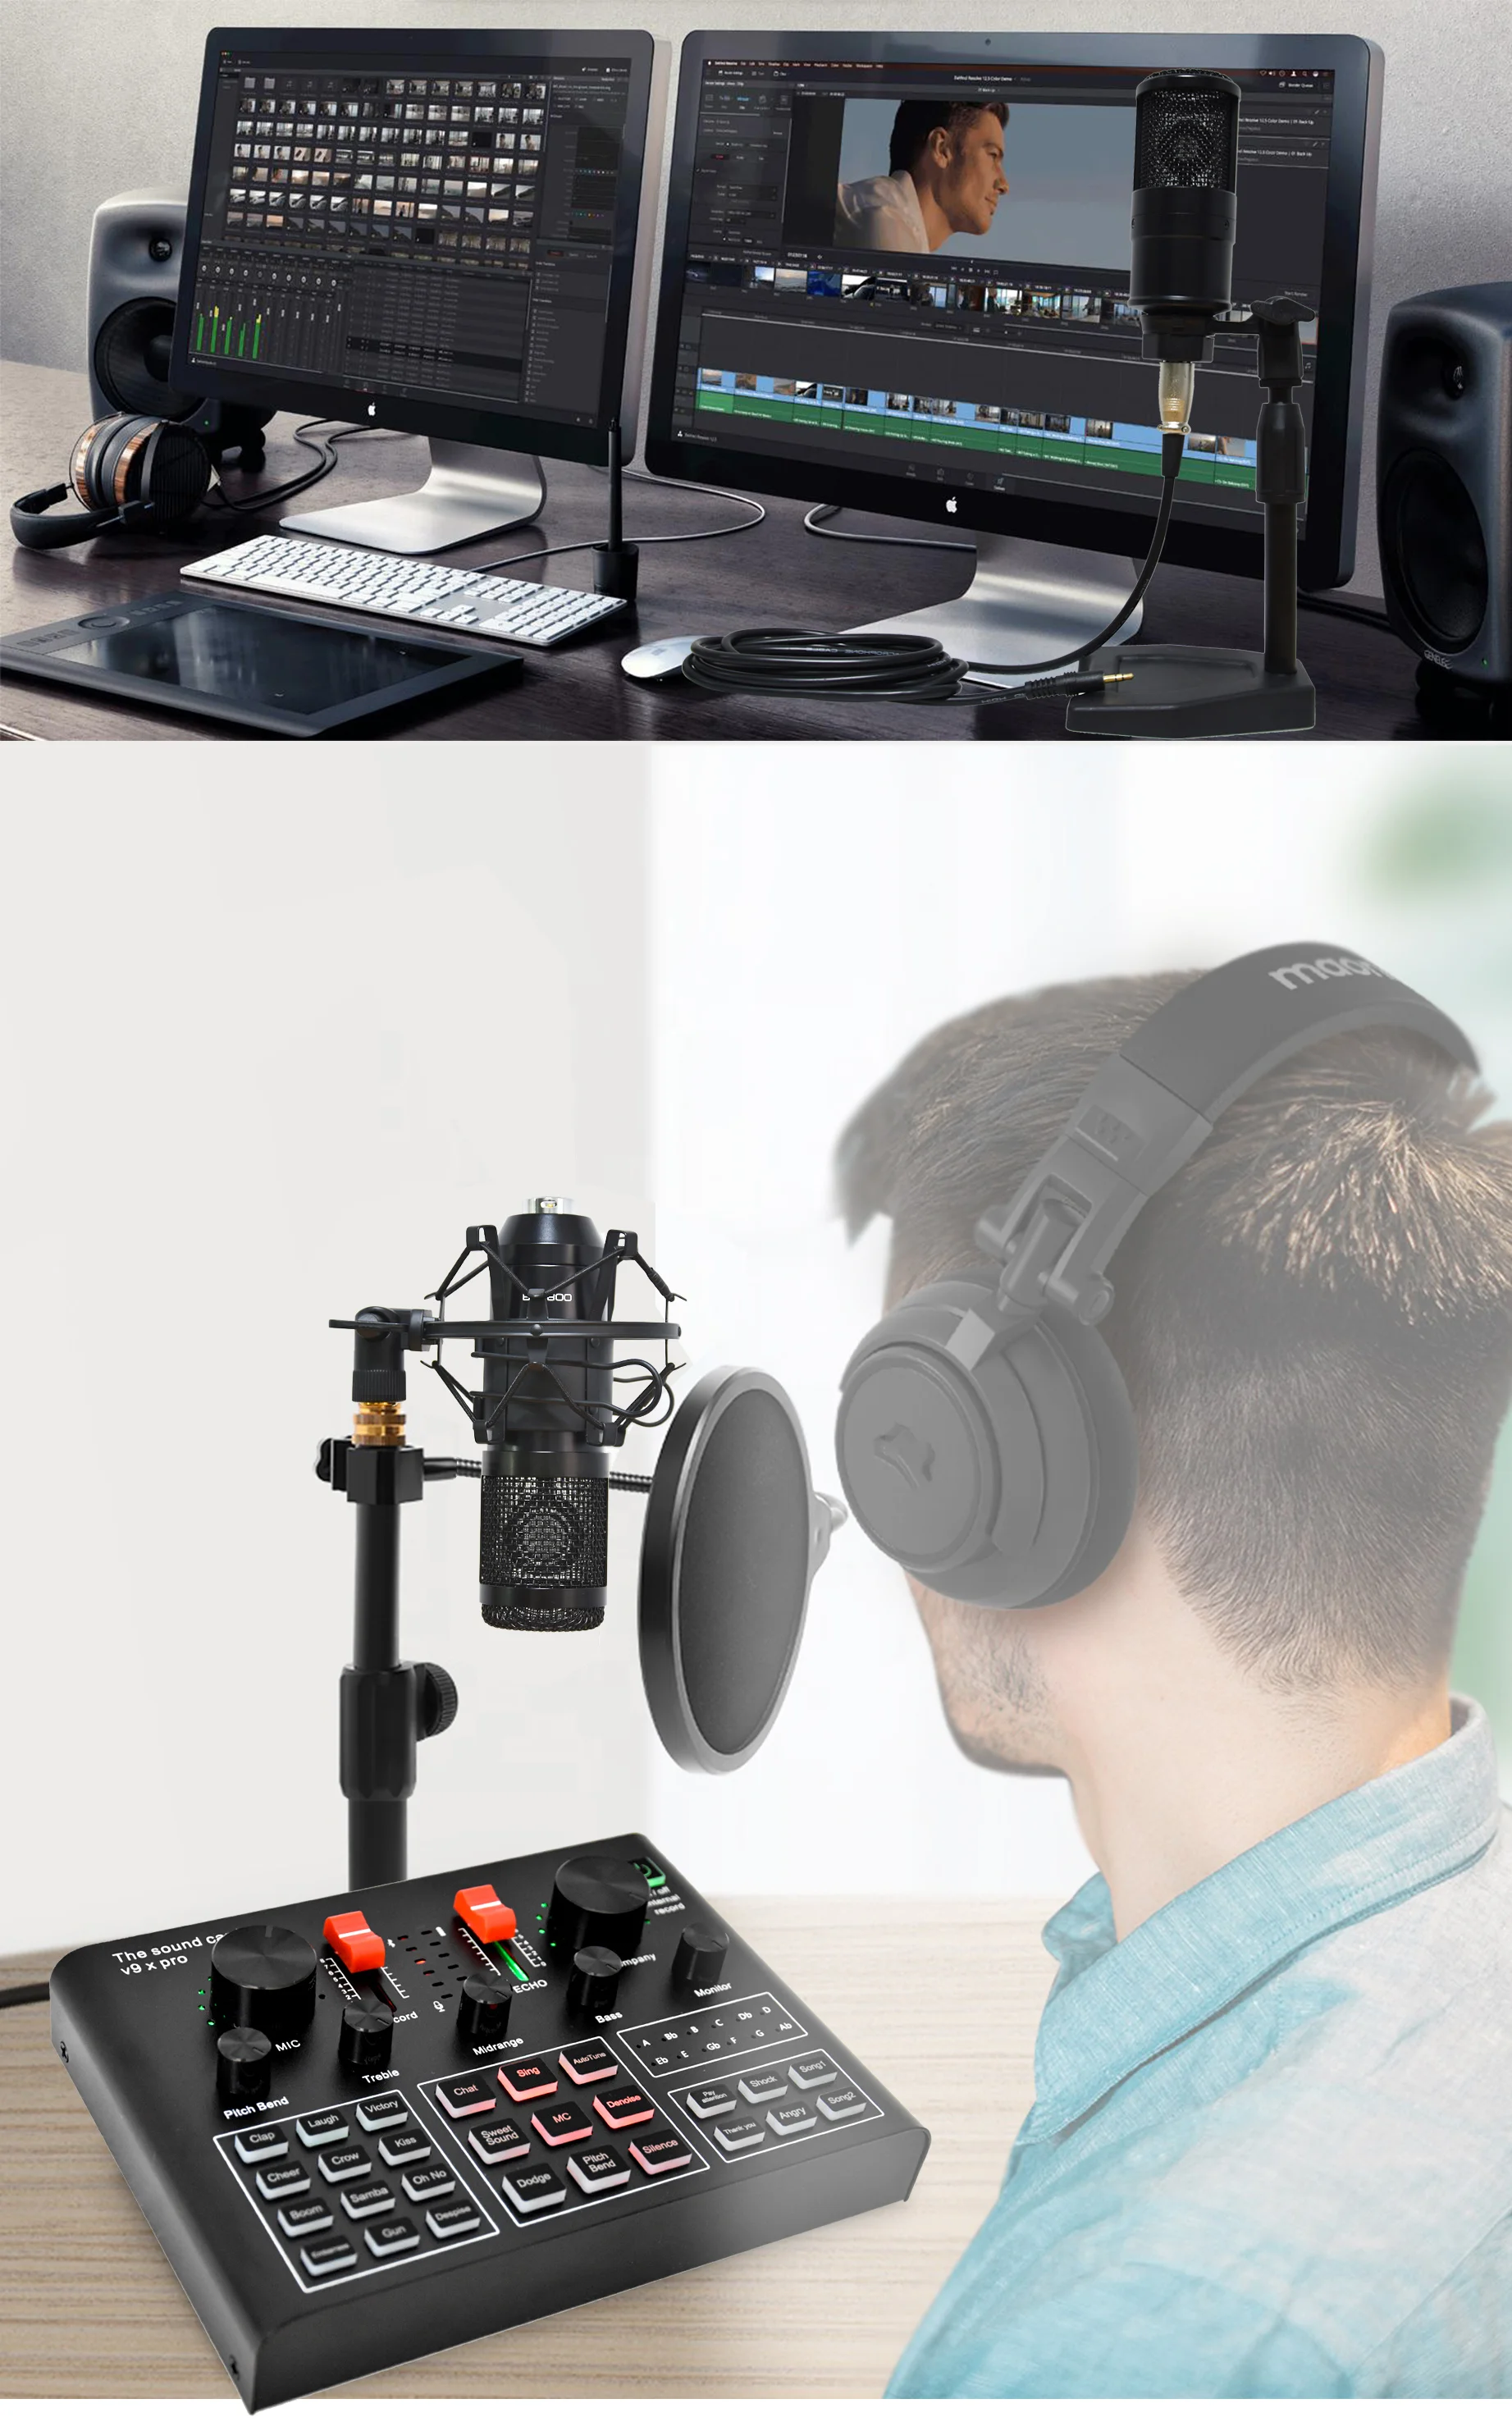 V9XPro Sound Card Studio Mixer Noise Reduction Portable Microphone Voice BM800 Live Broadcast for Phone Computer Record V9X Pro